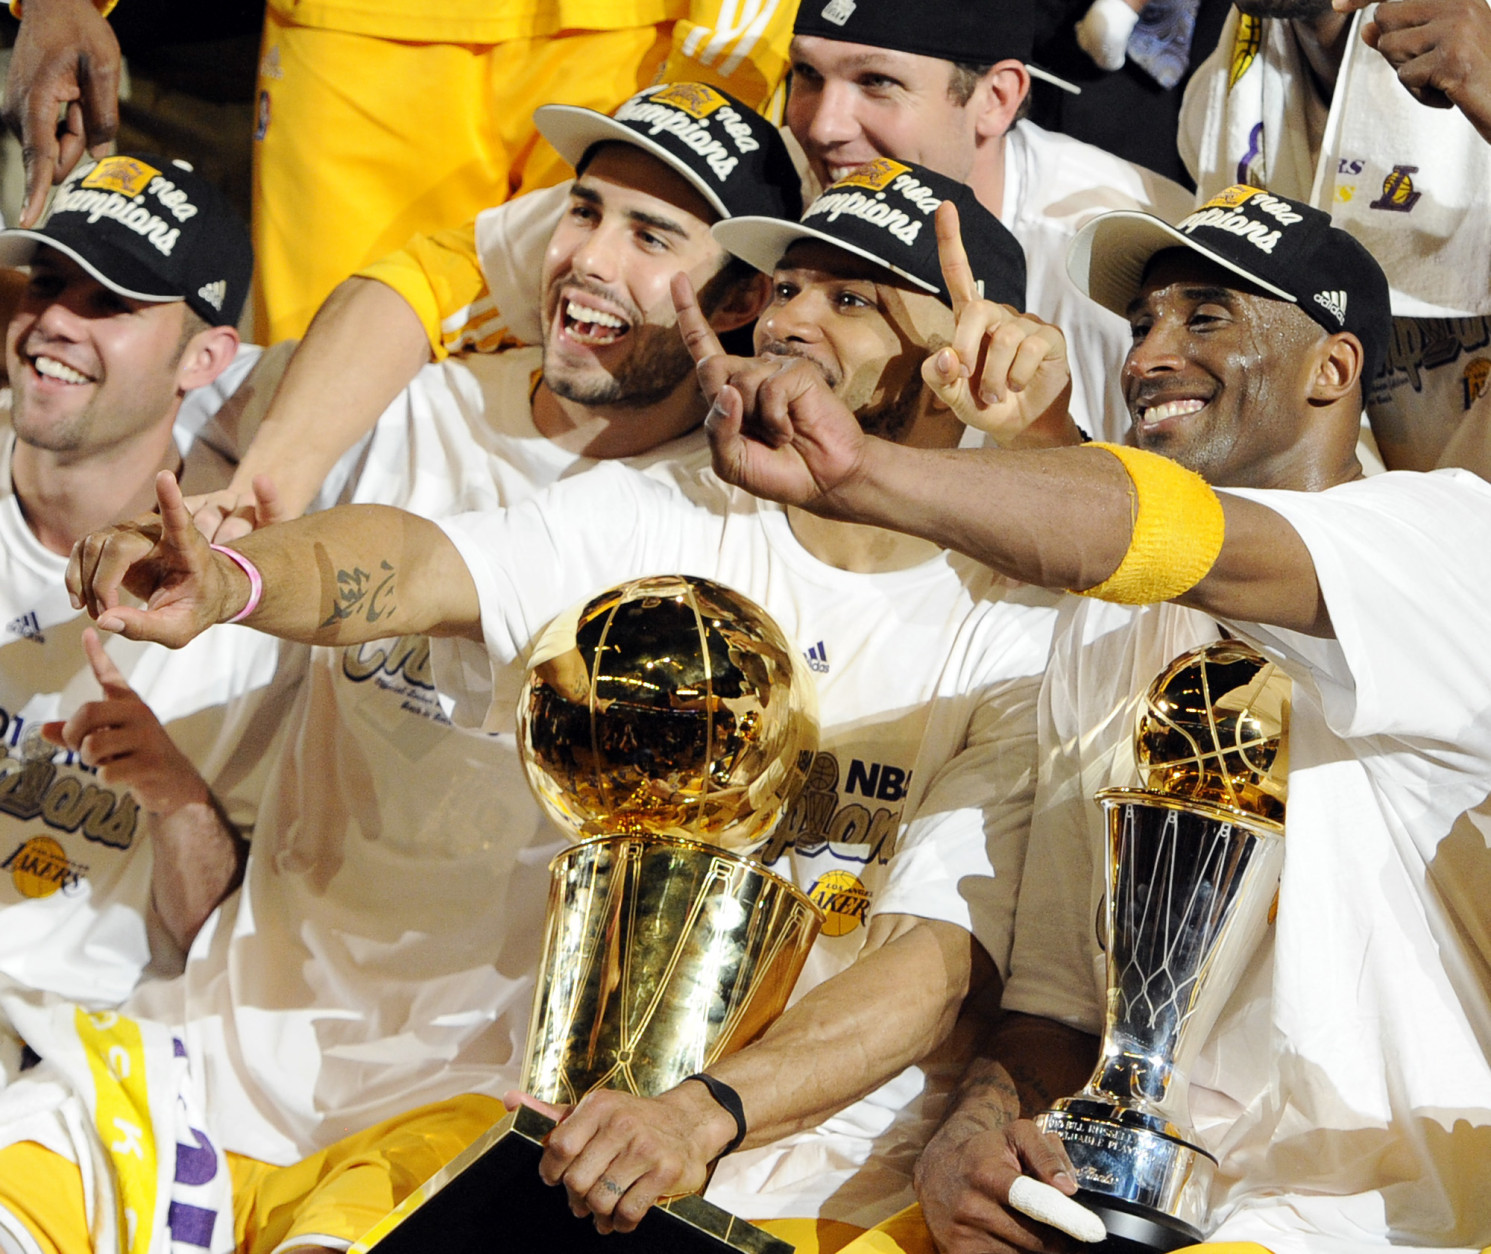 Los Angeles Lakers guard Derek Fisher, center, holds the Larry O'Brien Trophy as Kobe Bryant, right, holds the MVP trophy as they celebrate after beating the Boston Celtics, 83-79, in Game 7 of the NBA basketball finals Thursday, June 17, 2010, in Los Angeles. At second left is Lakers' Sasha Vujacic.  (AP Photo/Mark J. Terrill)